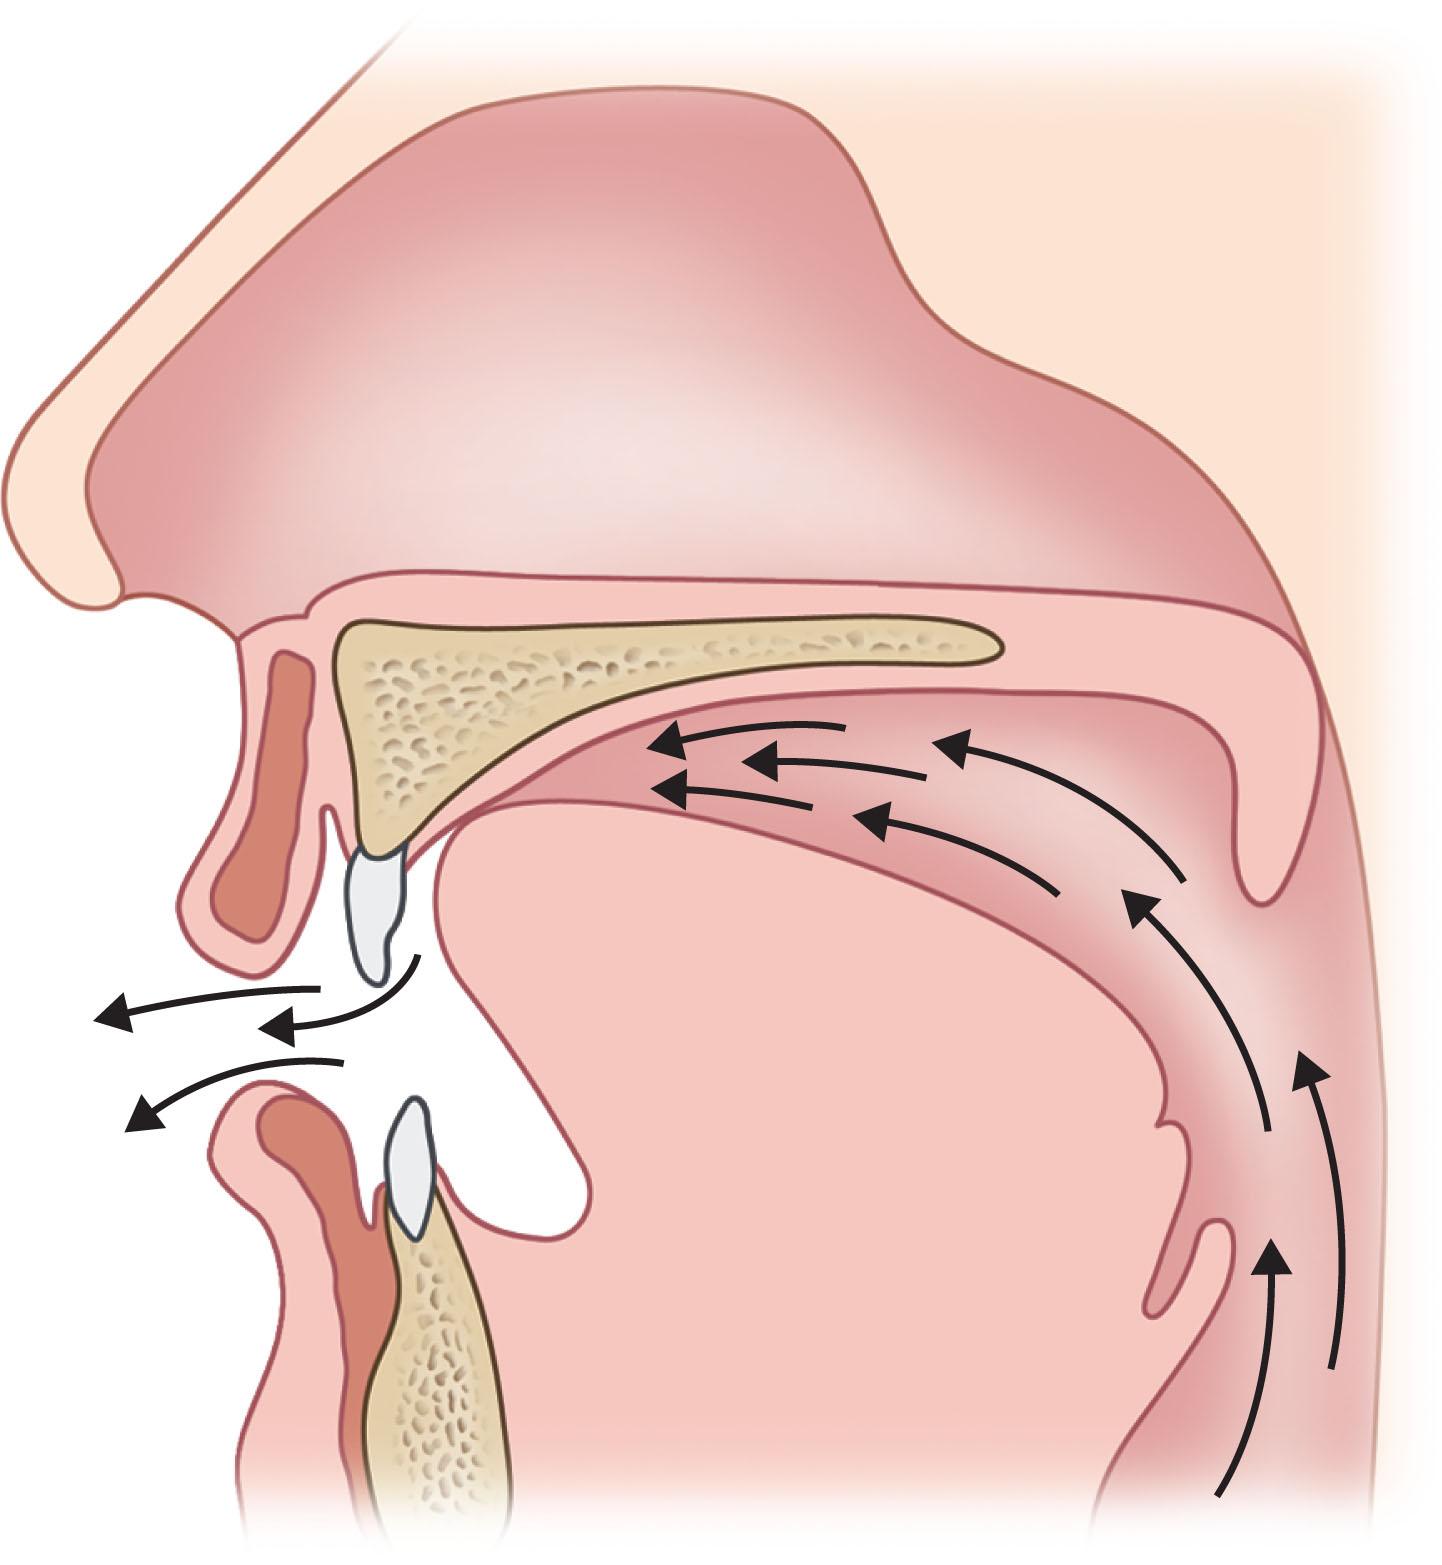 Figure 21.9.3, Lateral view of normal velopharyngeal closure for speech during production of an oral pressure consonant.